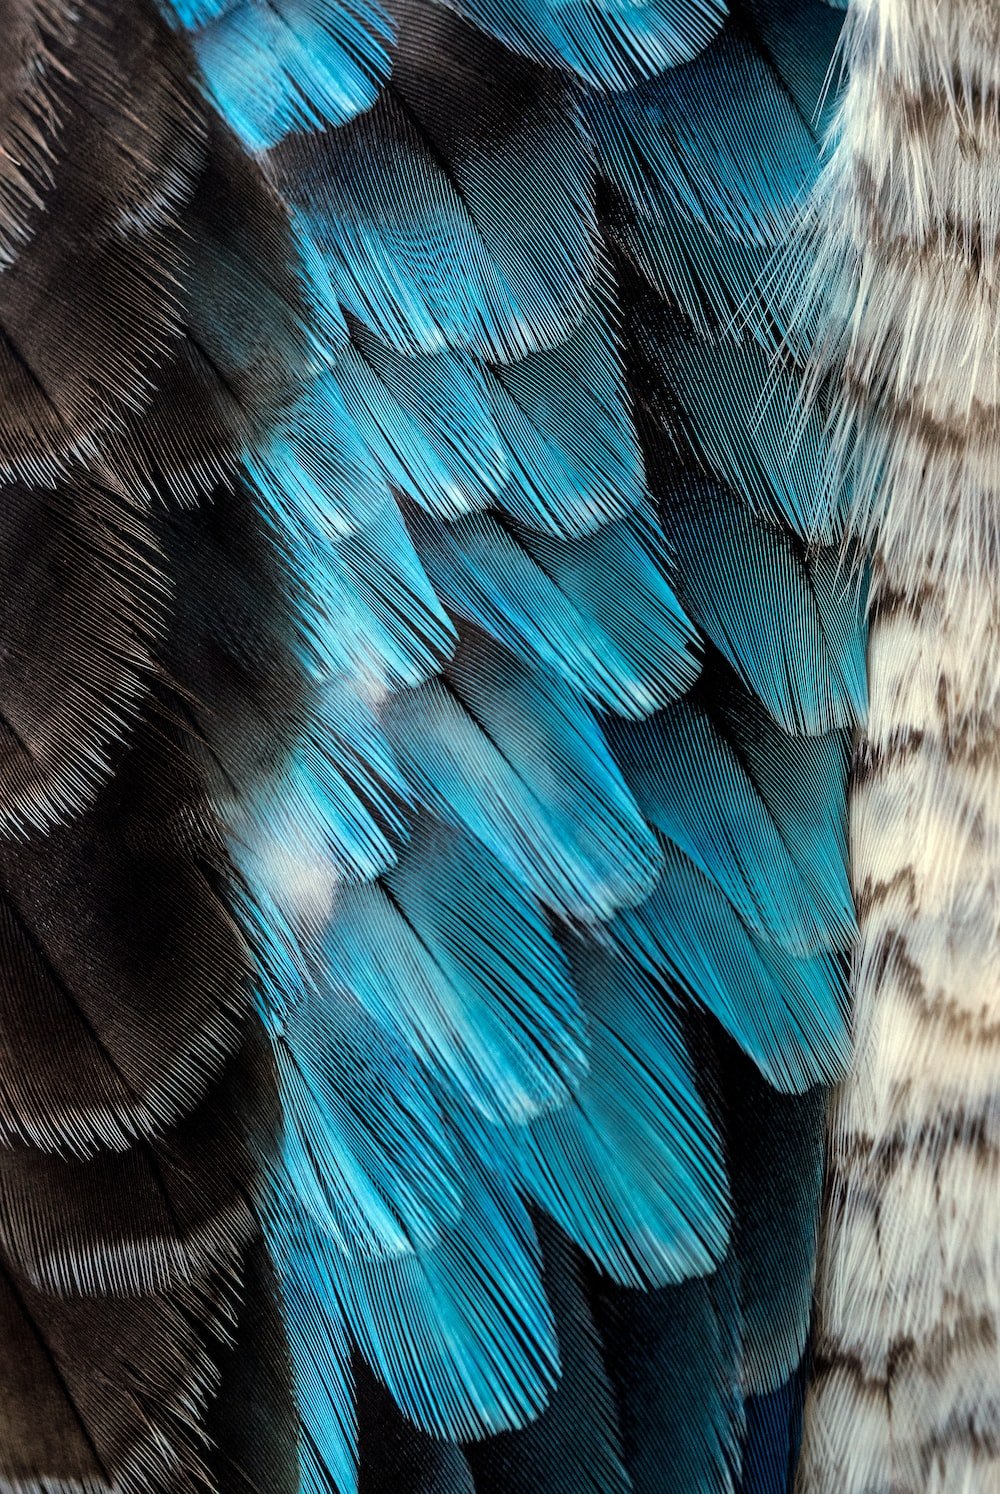 Bird Feathers Picture. Download Free Image